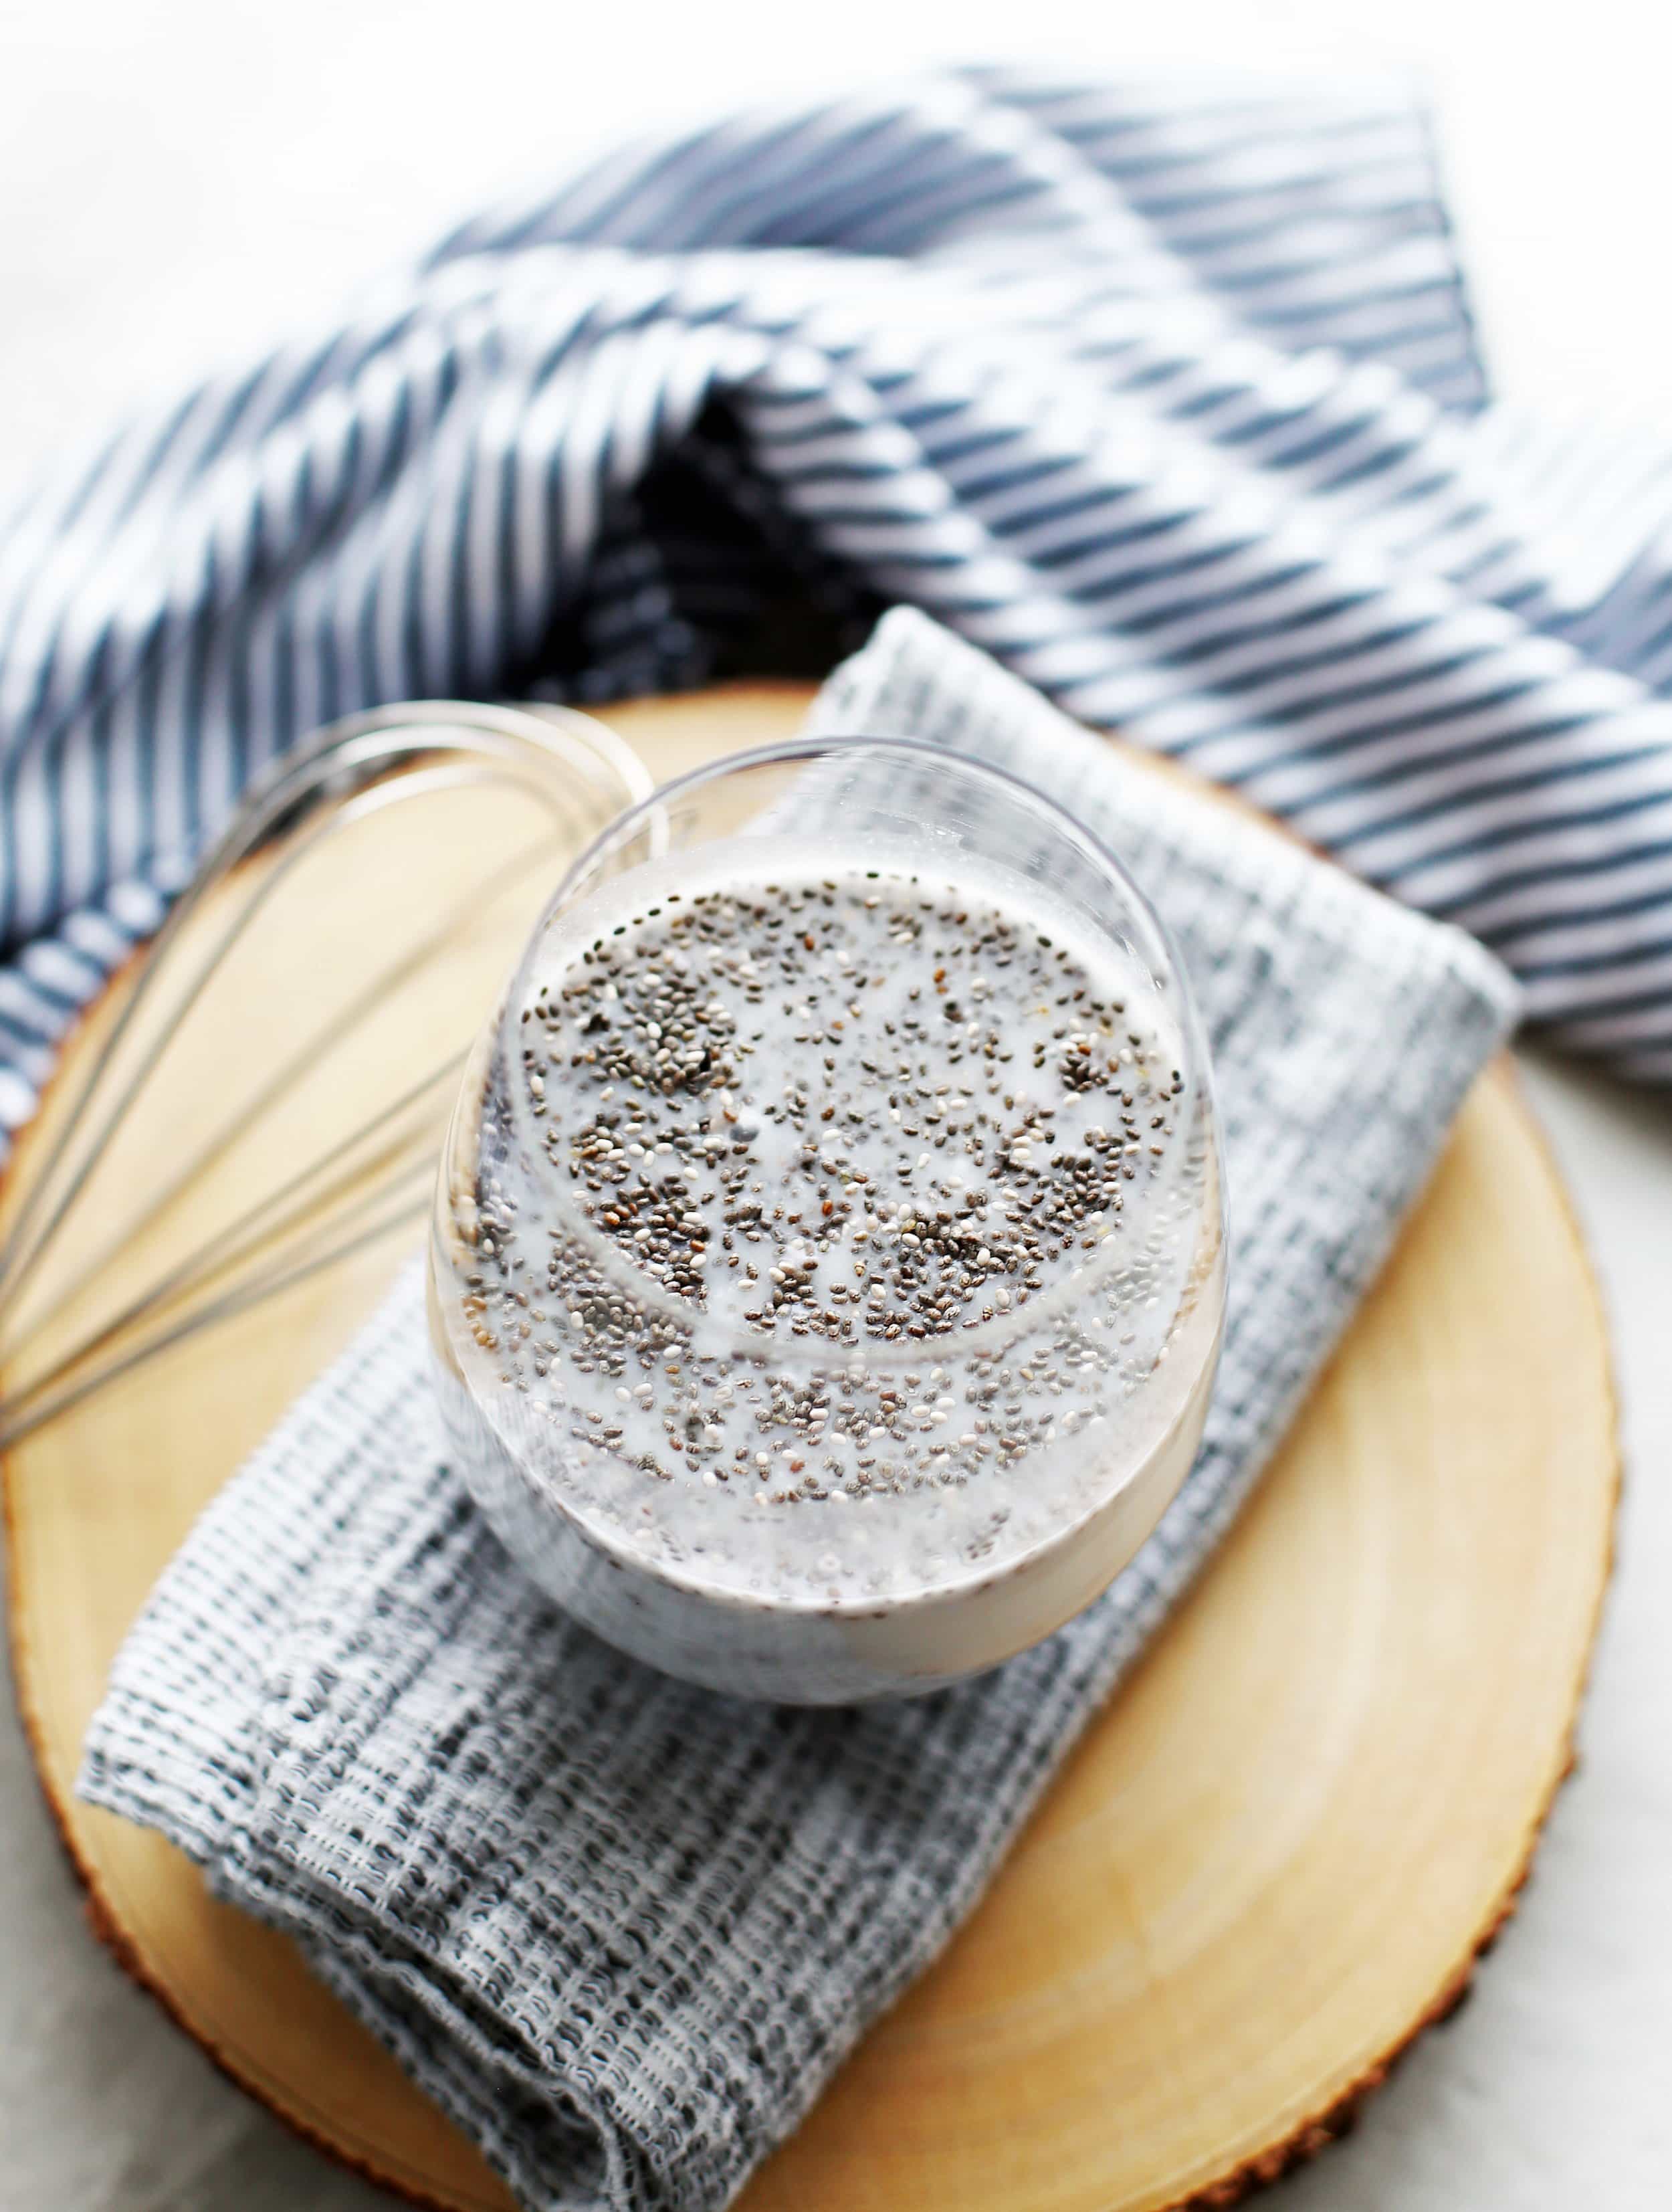 Coconut milk and chia seeds in a round drinking glass with a small whisk to its side.